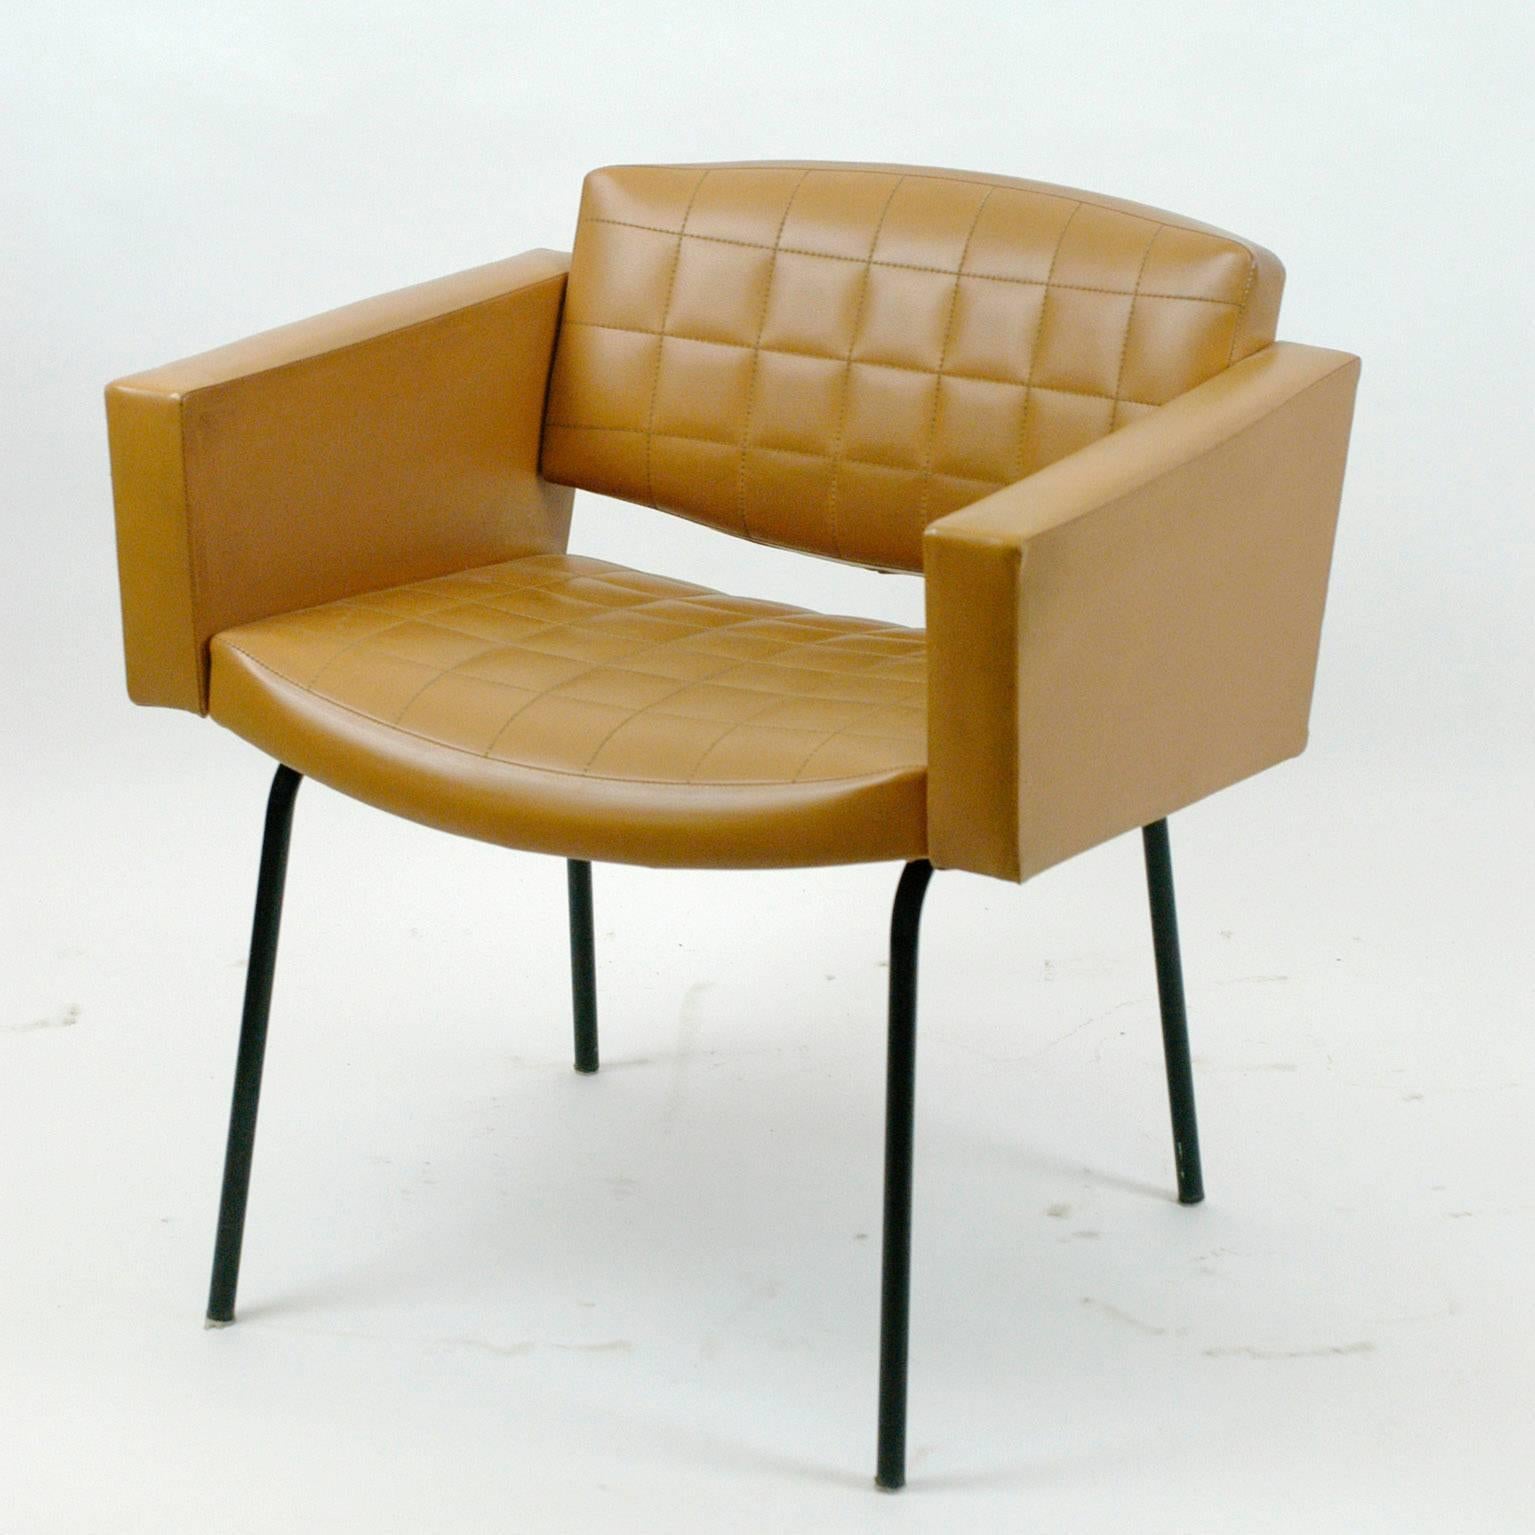 Mid-Century Modern armchair with original Skai upholstery and black laquered base, original Meurop tag on the underside.
Matching chairs available.